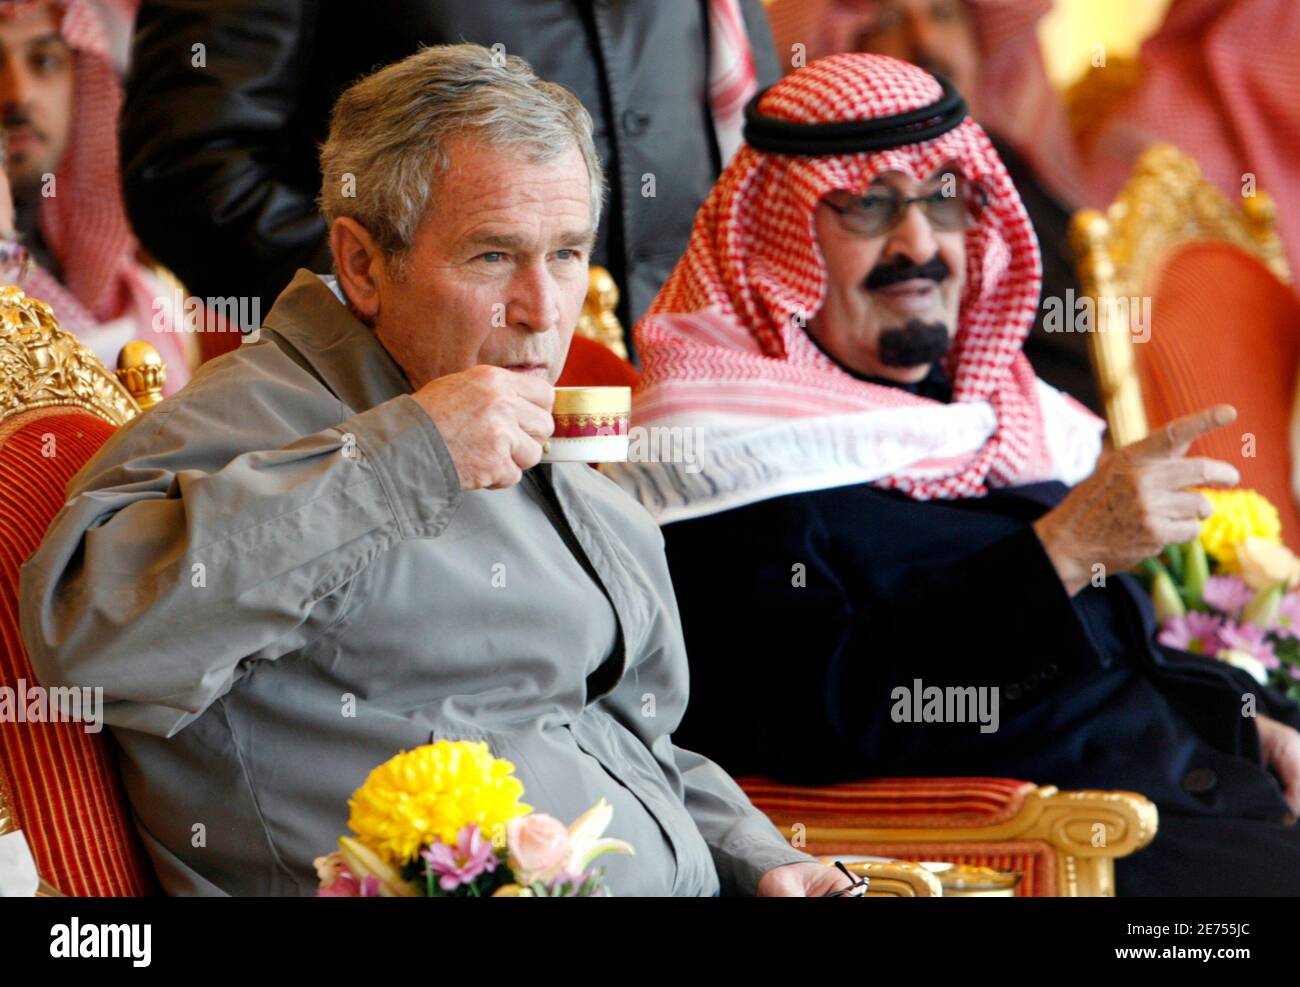 U.S. President George W. Bush sips his drink as Saudi King Abdullah makes a point while some of the King's finest horses are paraded before Bush during his visit to Al Janadriyah Farm in Al Janadriyah, Saudi Arabia January 15, 2008. The farm is the King Abdullah's  personal country and weekend retreat.        REUTERS/Kevin Lamarque   (SAUDI ARABIA) Stock Photo